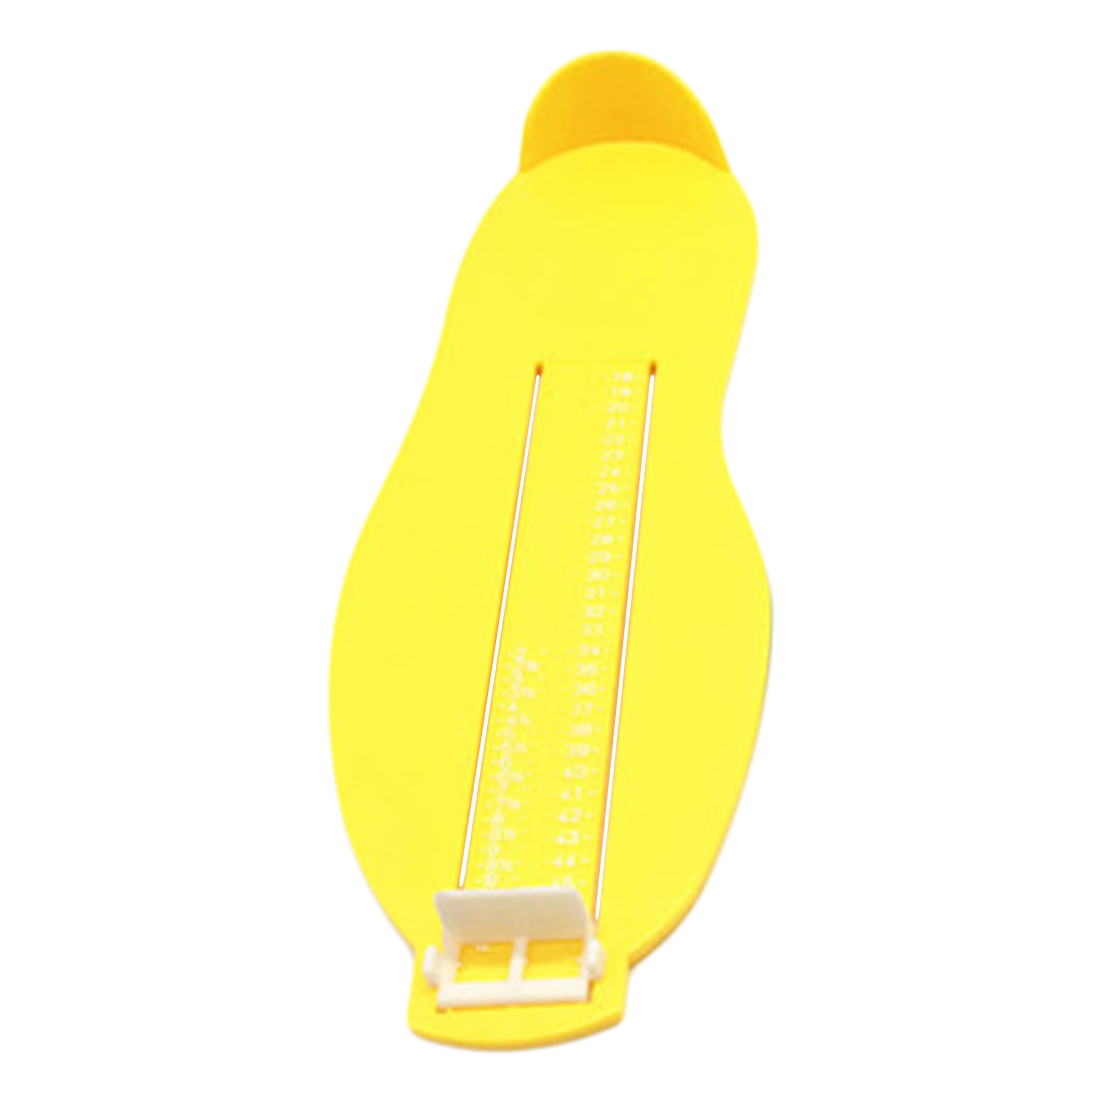 Hot Adults Foot Measuring Device Shoes Size Gauge Measure Ruler Tool Device Helper